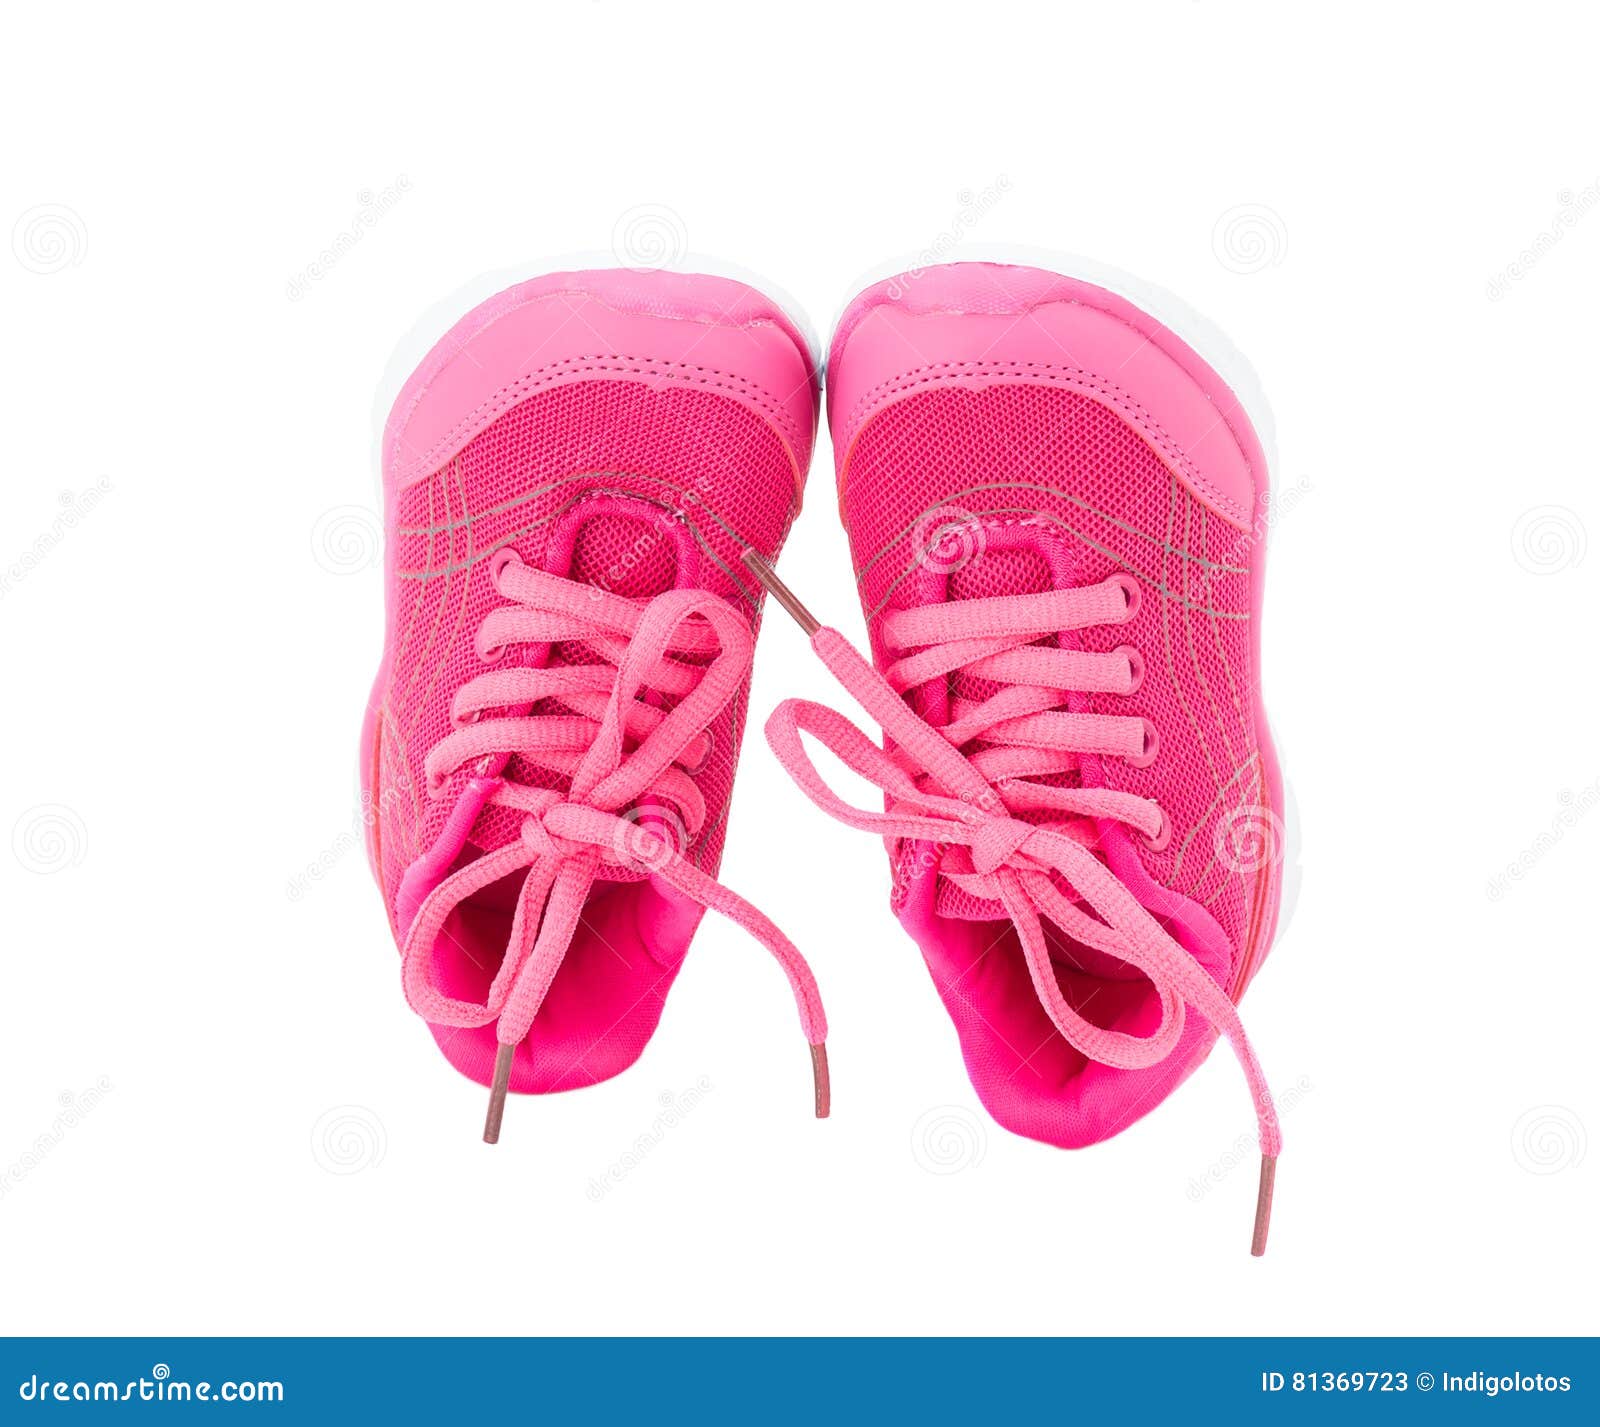 Pink Training Shoes for Girls. Stock Image - Image of girl, clothing ...